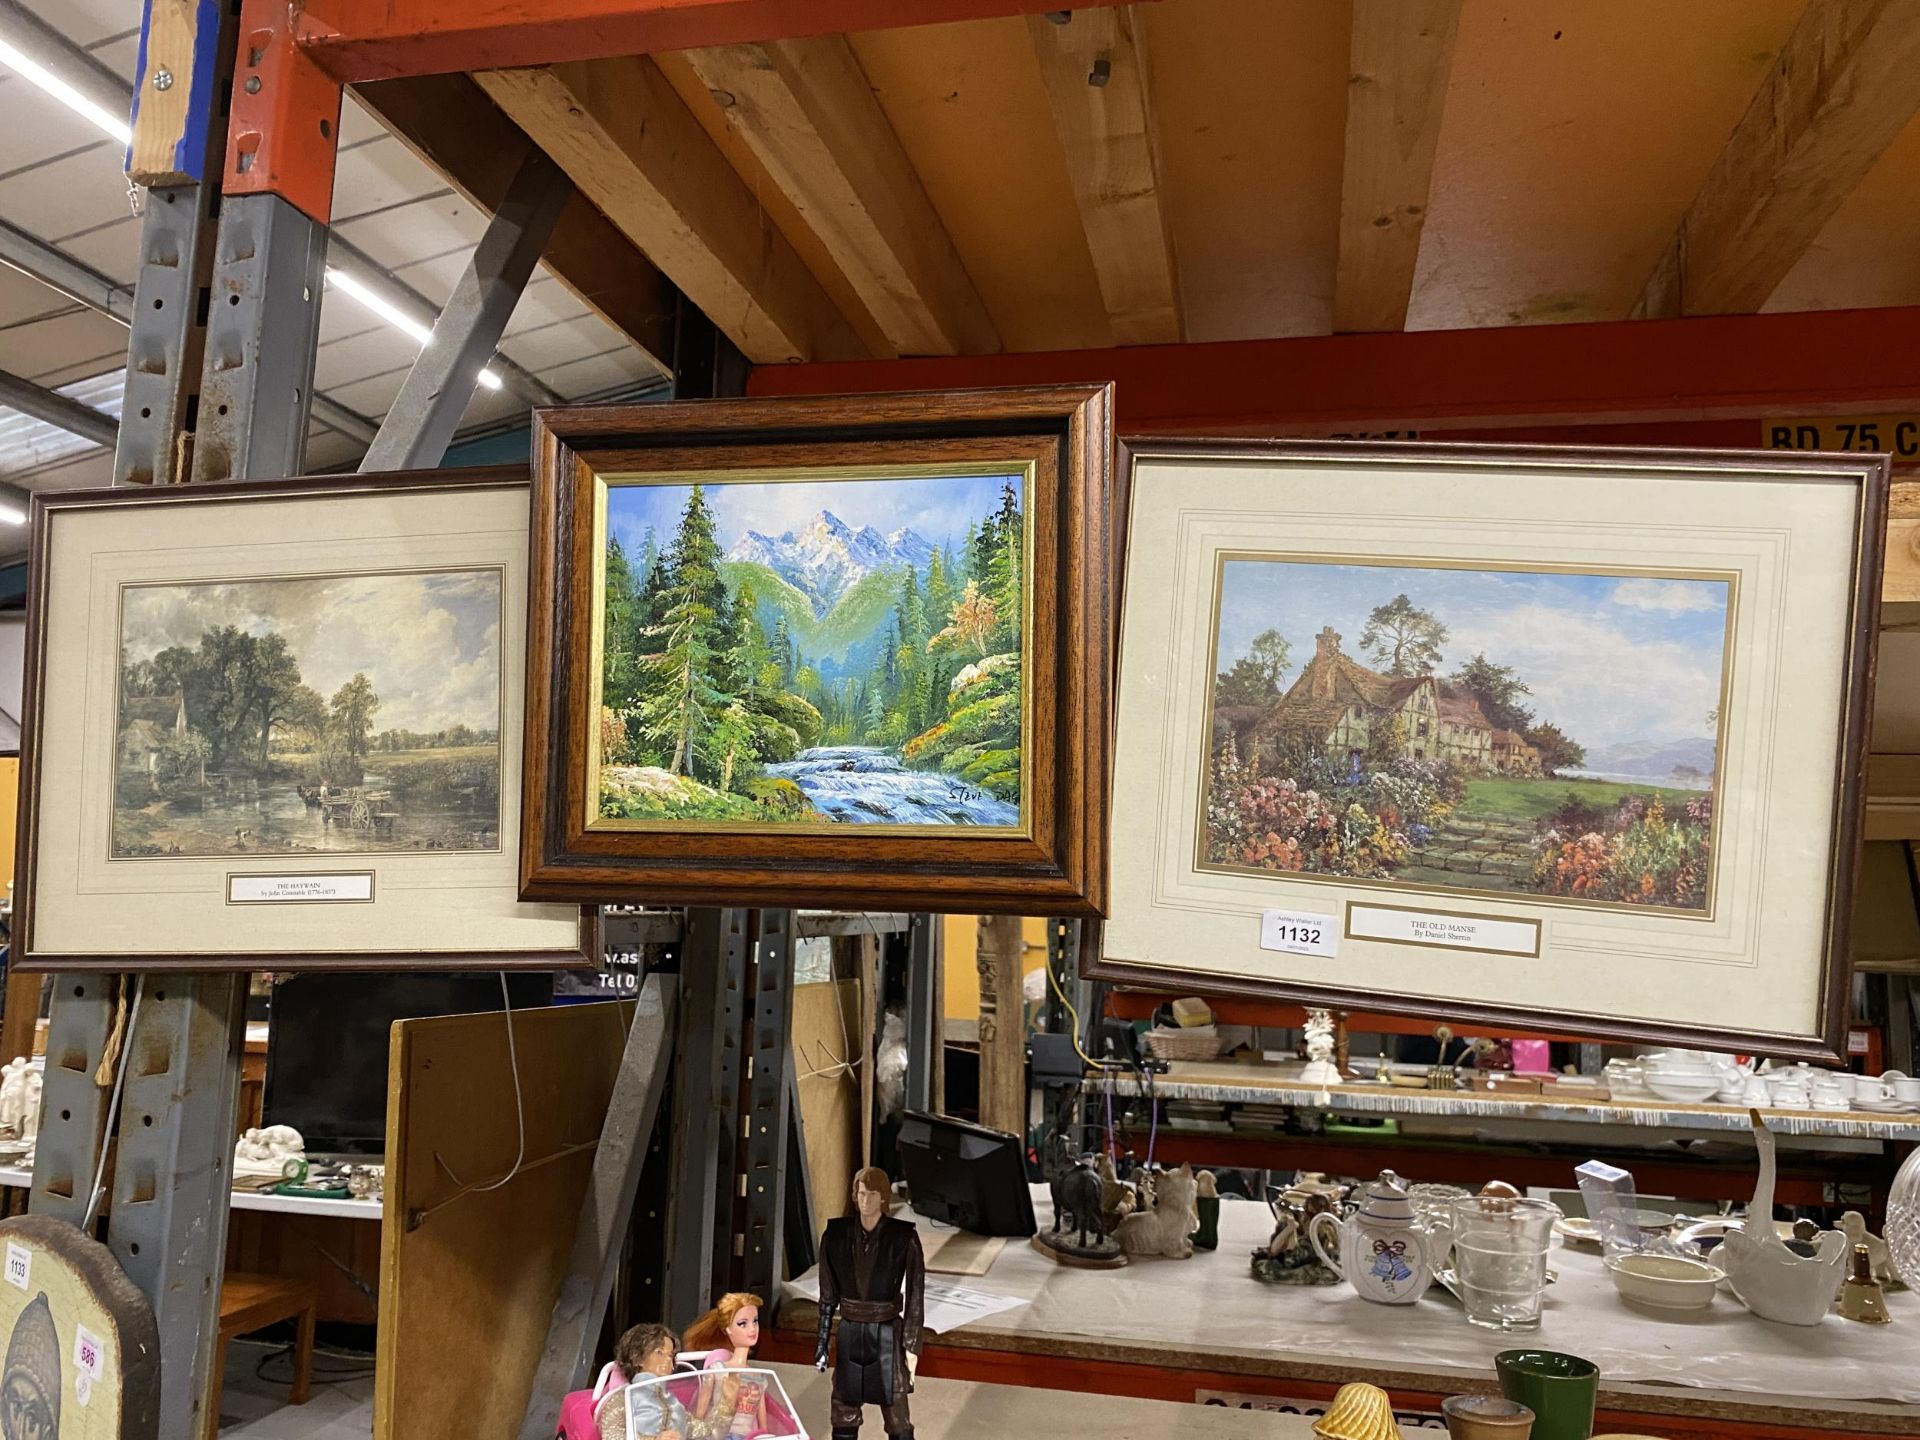 THREE FRAMED PRINTS 'THE OLD MANSE', 'THE HAYWAIN' AND 'THE ORDER OF THE BATH' PLUS A FRAMED OIL